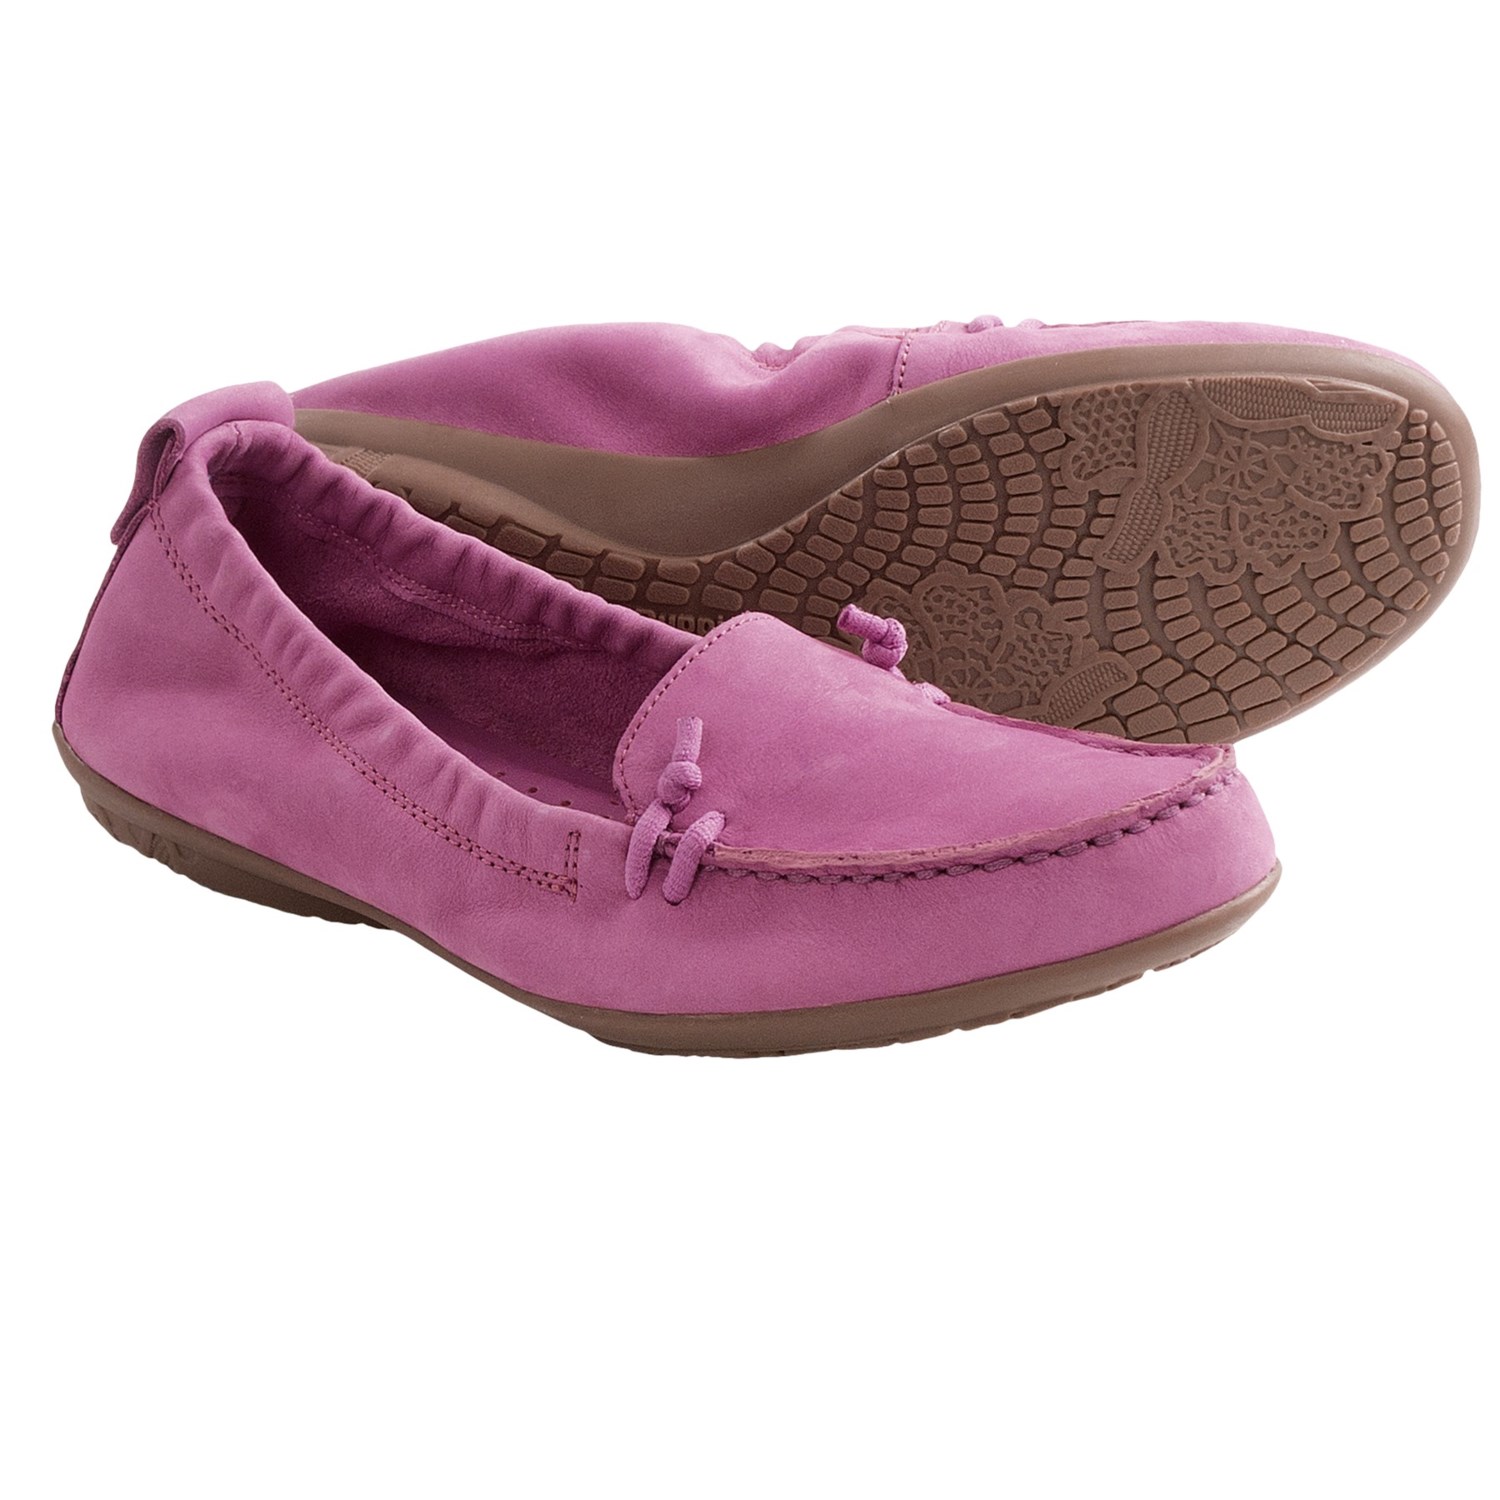 Hush Puppies Ceil Shoes - Slip-Ons (For Women) in Fuschia